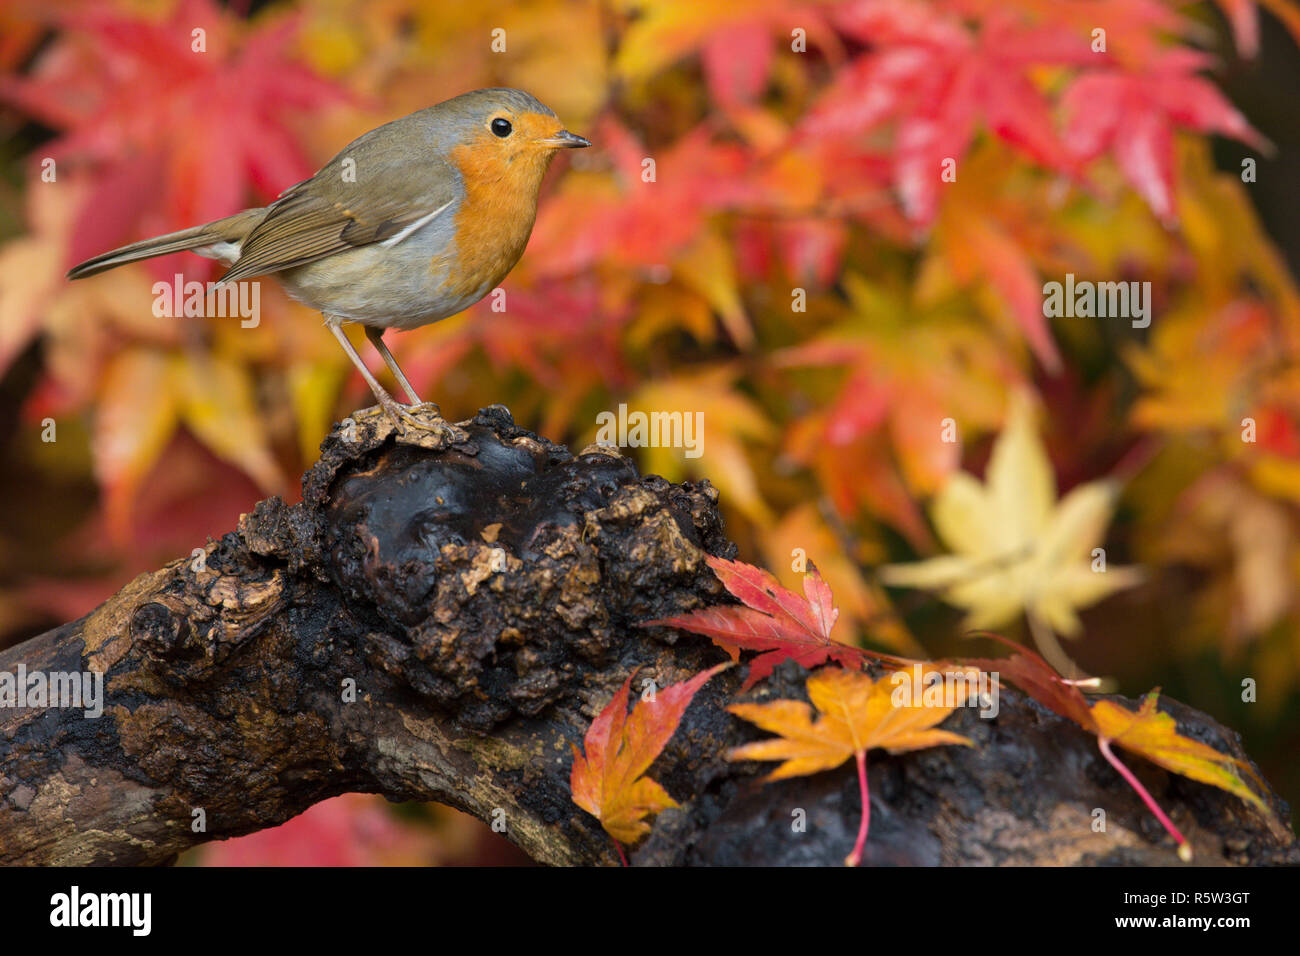 Robin, European Robin, Erithacus rubecula, standing on an old log with autumn leaves of Acer palmatum, Japanese maple, red and gold, Sussex, UK, Nov. Stock Photo